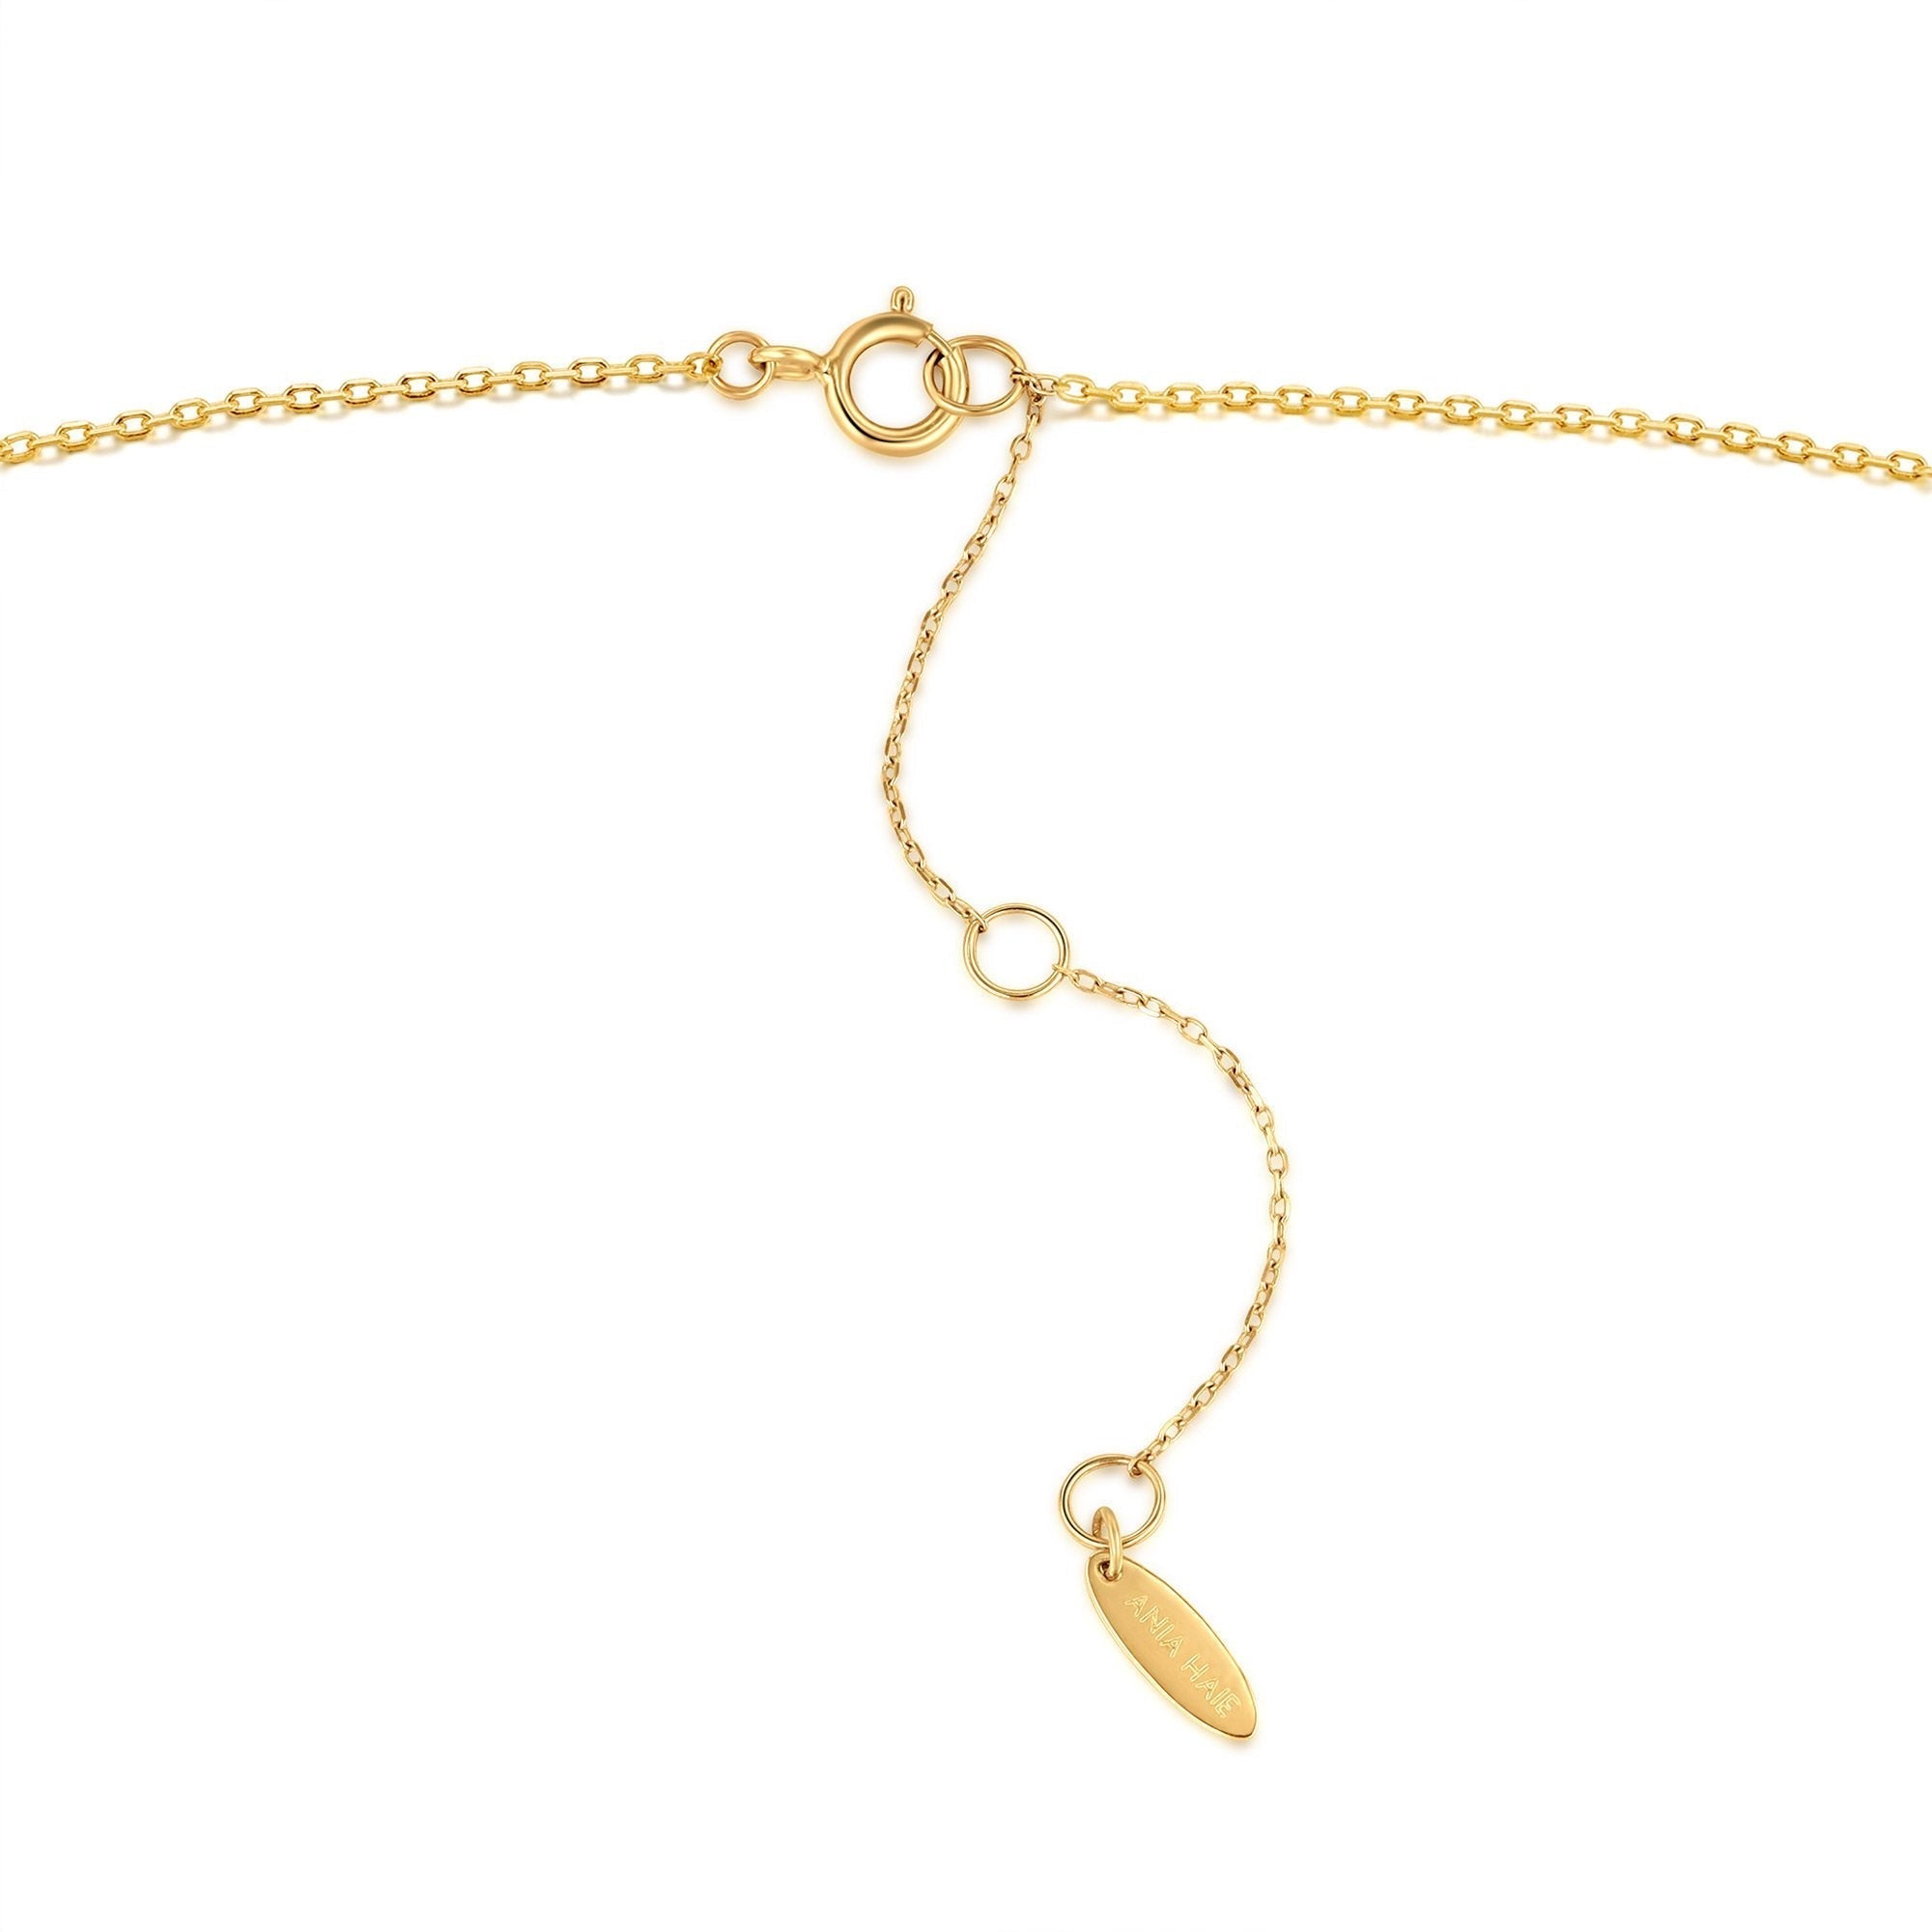 Ania Haie 14kt Gold Mixed Disc Necklace